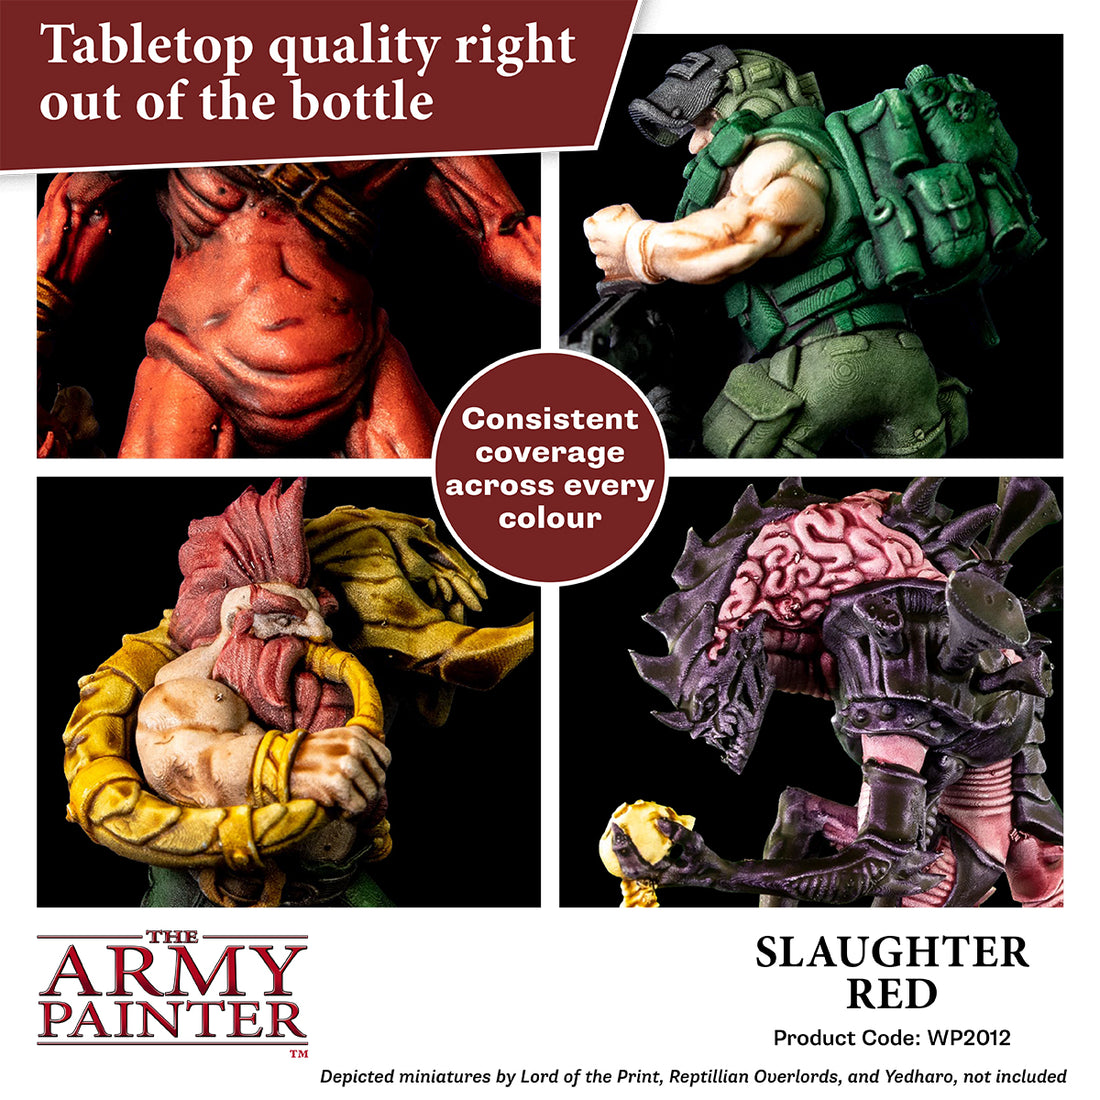 Army Painter: Speedpaint: Slaughter Red